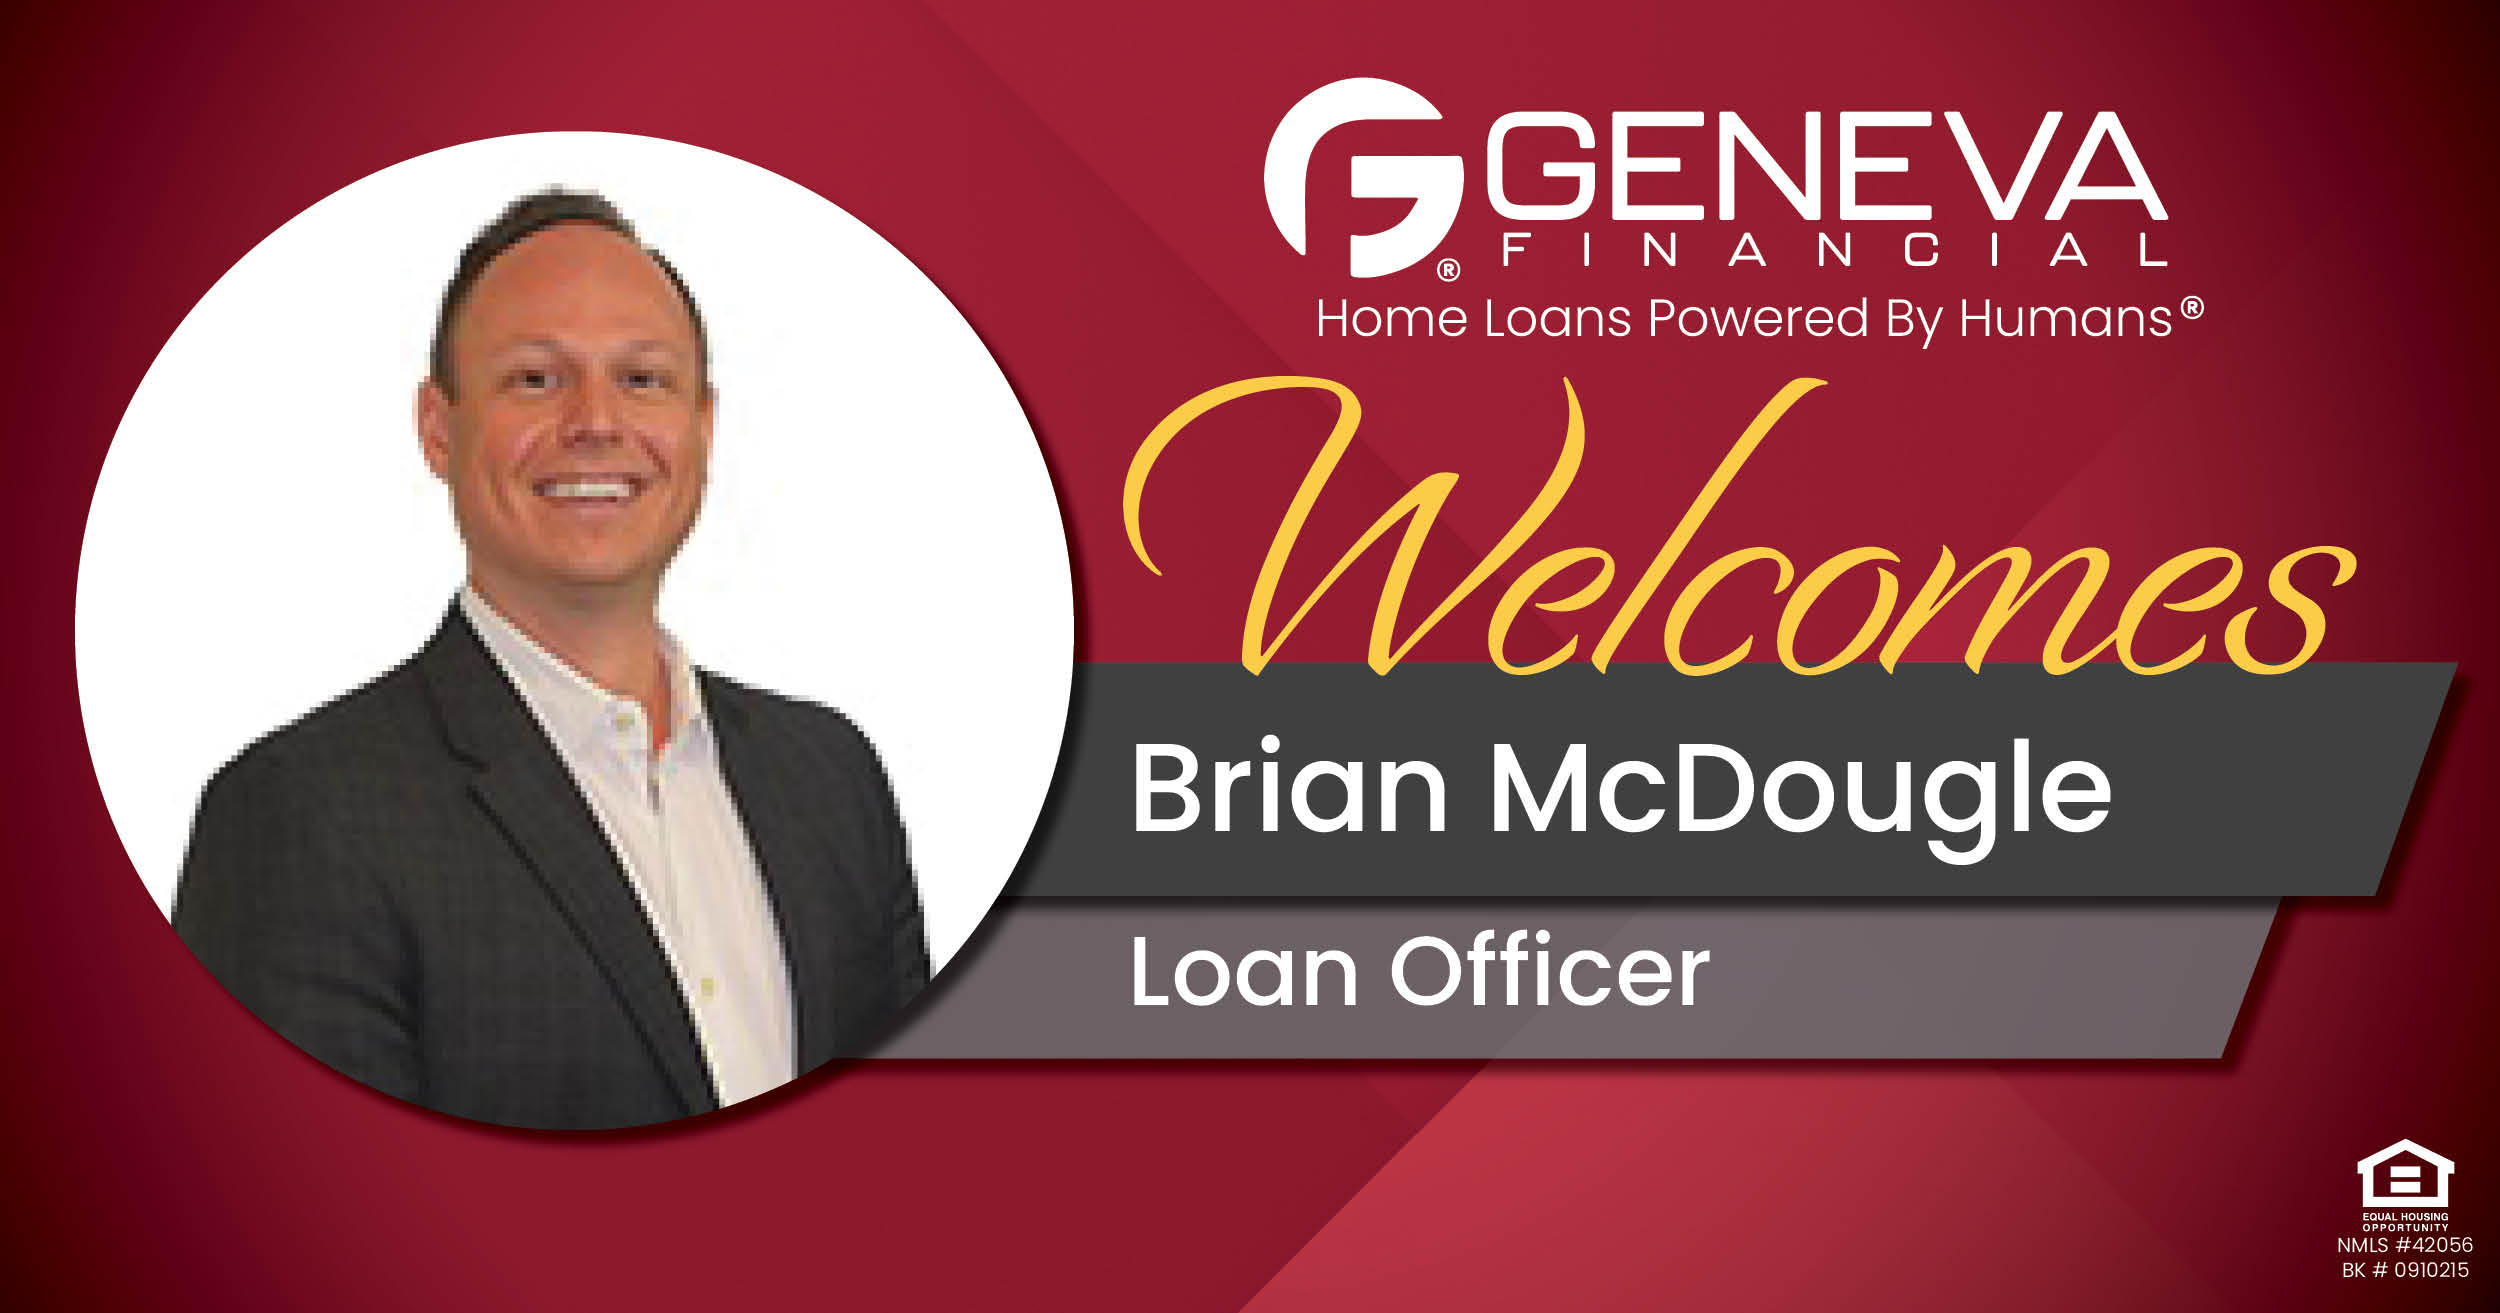 Geneva Financial Welcomes New Loan Officer Brian McDougle to Ohio Market – Home Loans Powered by Humans®.